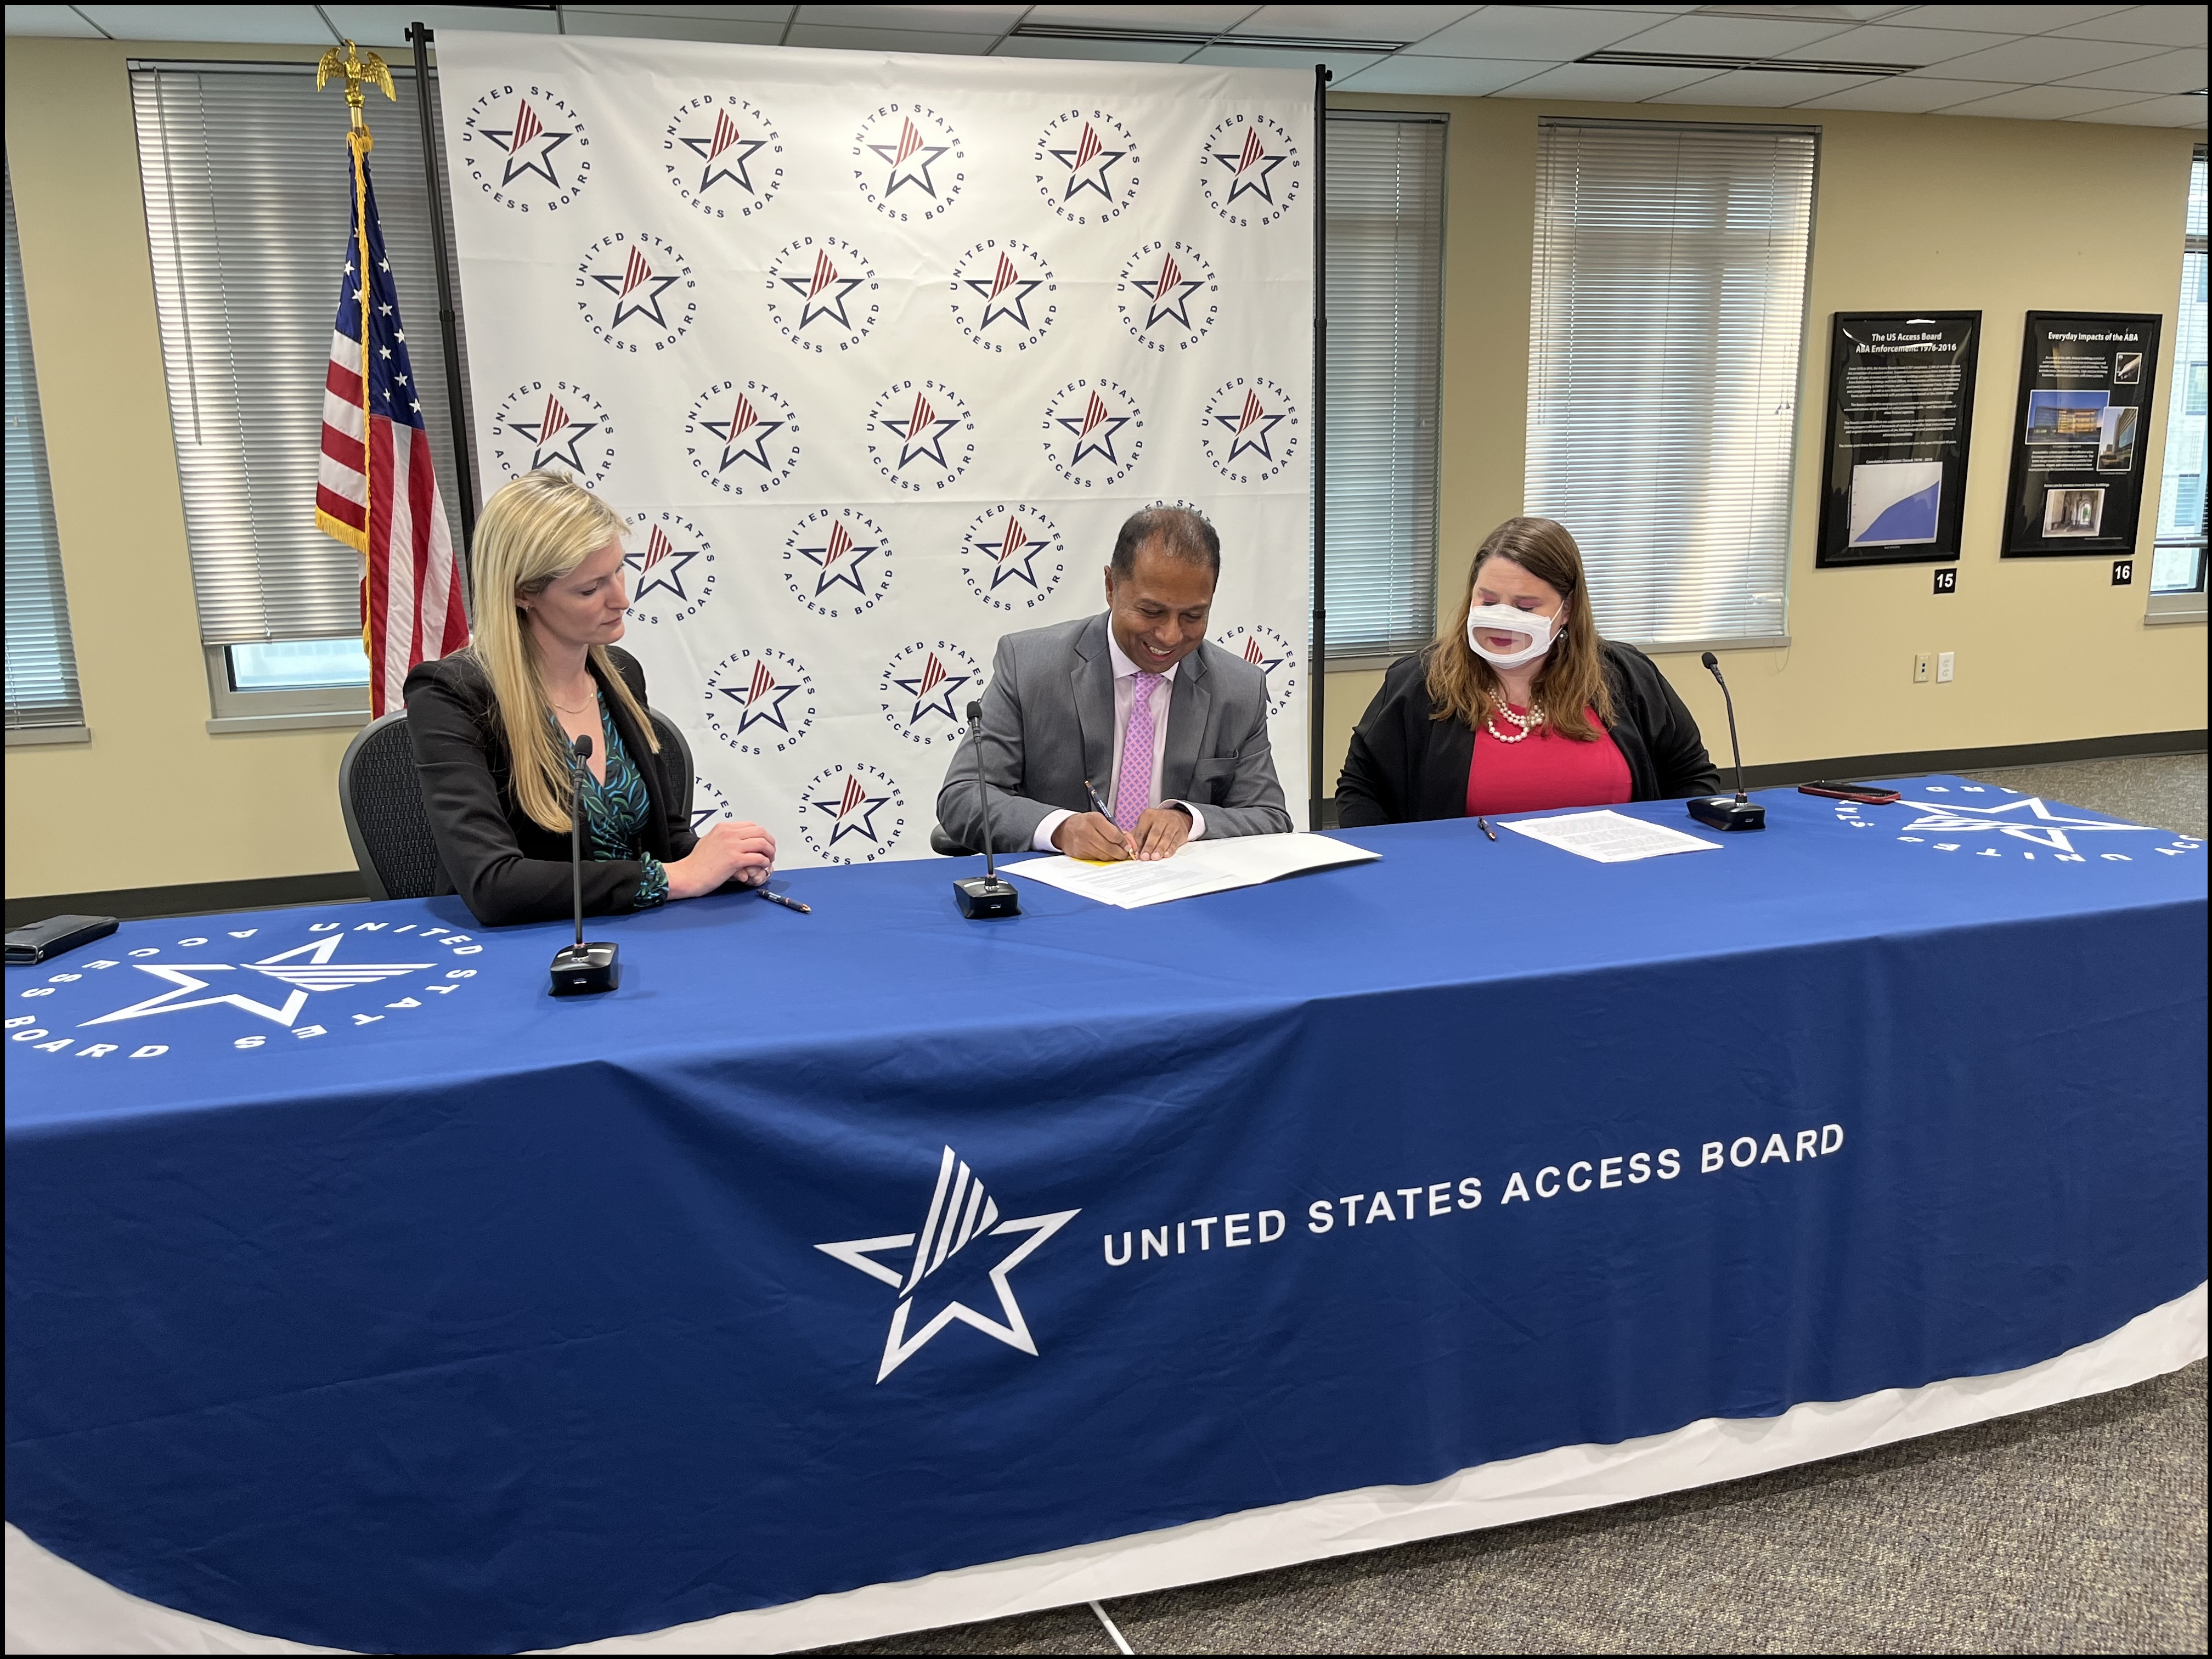 Access Board Executive Director Sachin Pavithran, President and CEO of AAPD Maria Town, and President and CEO of CDT Alexandra Reeve Givens sign the MOU. They sit at a table with a blue tablecloth that has the Access Board logo on it. Behind them is a banner with a repeating pattern of the Board's logo next to the flag of the United States.